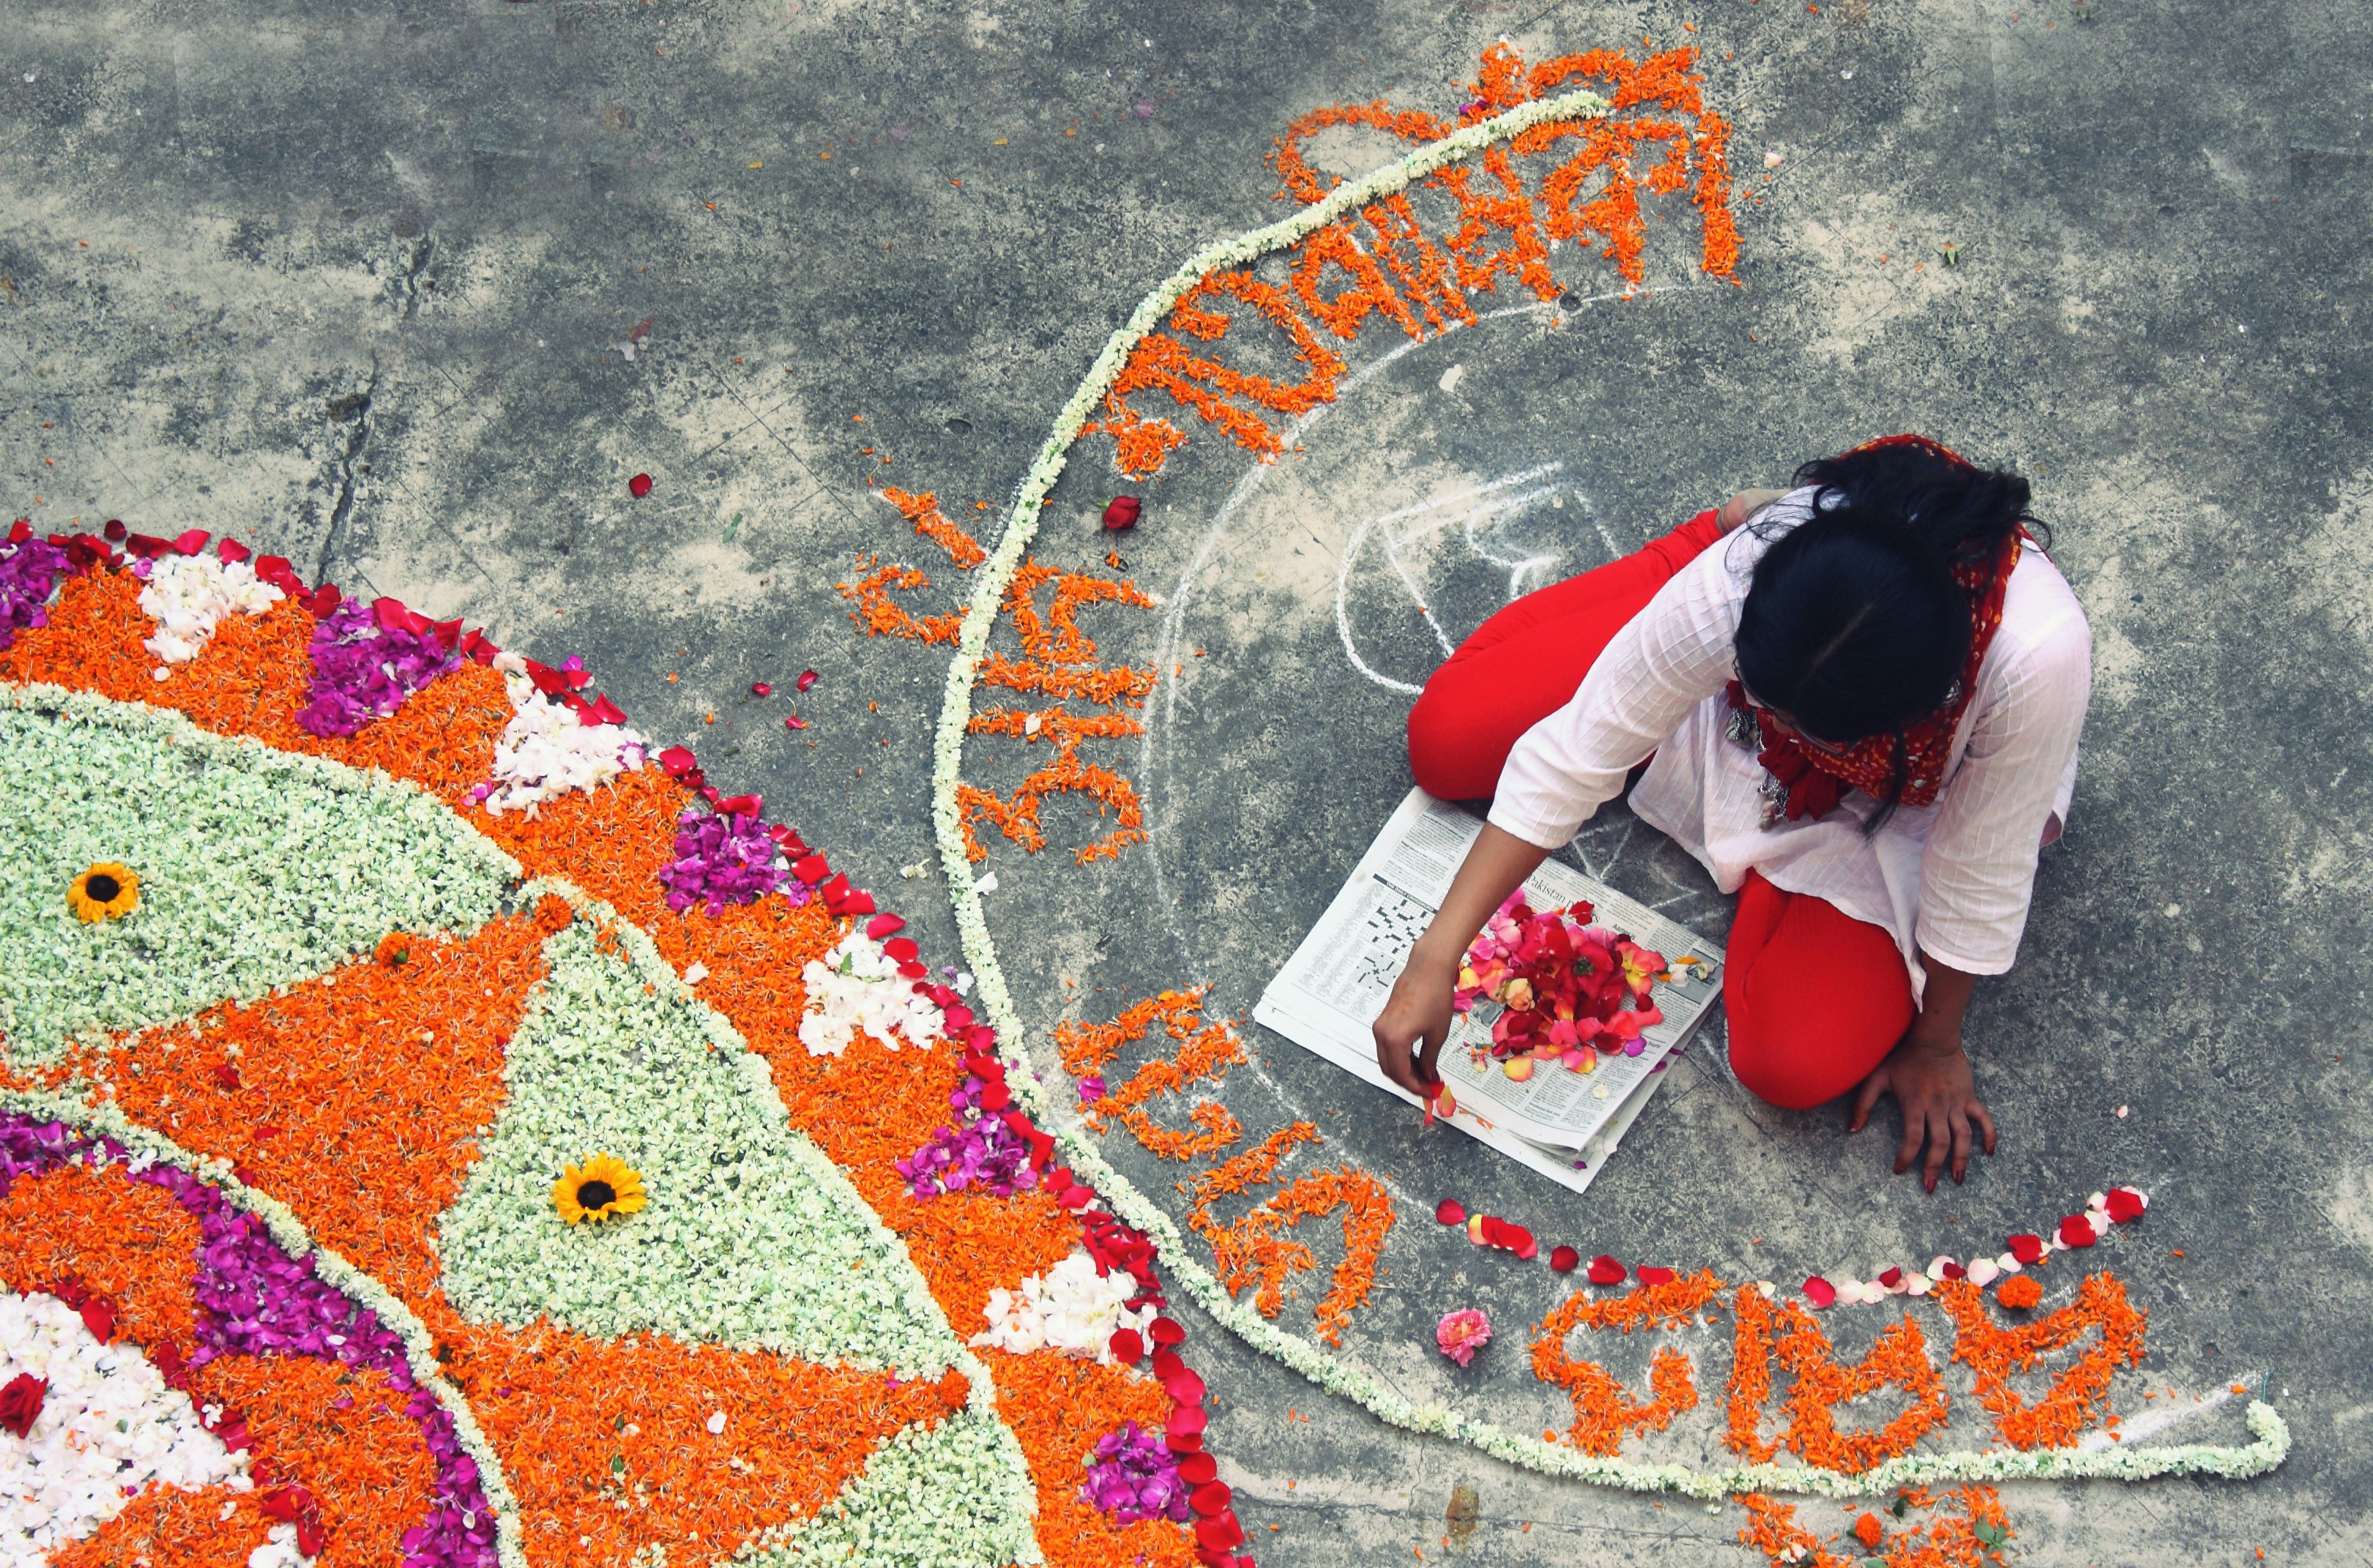 A woman sits on the ground making colourful patterns on the concrete using flower petals.